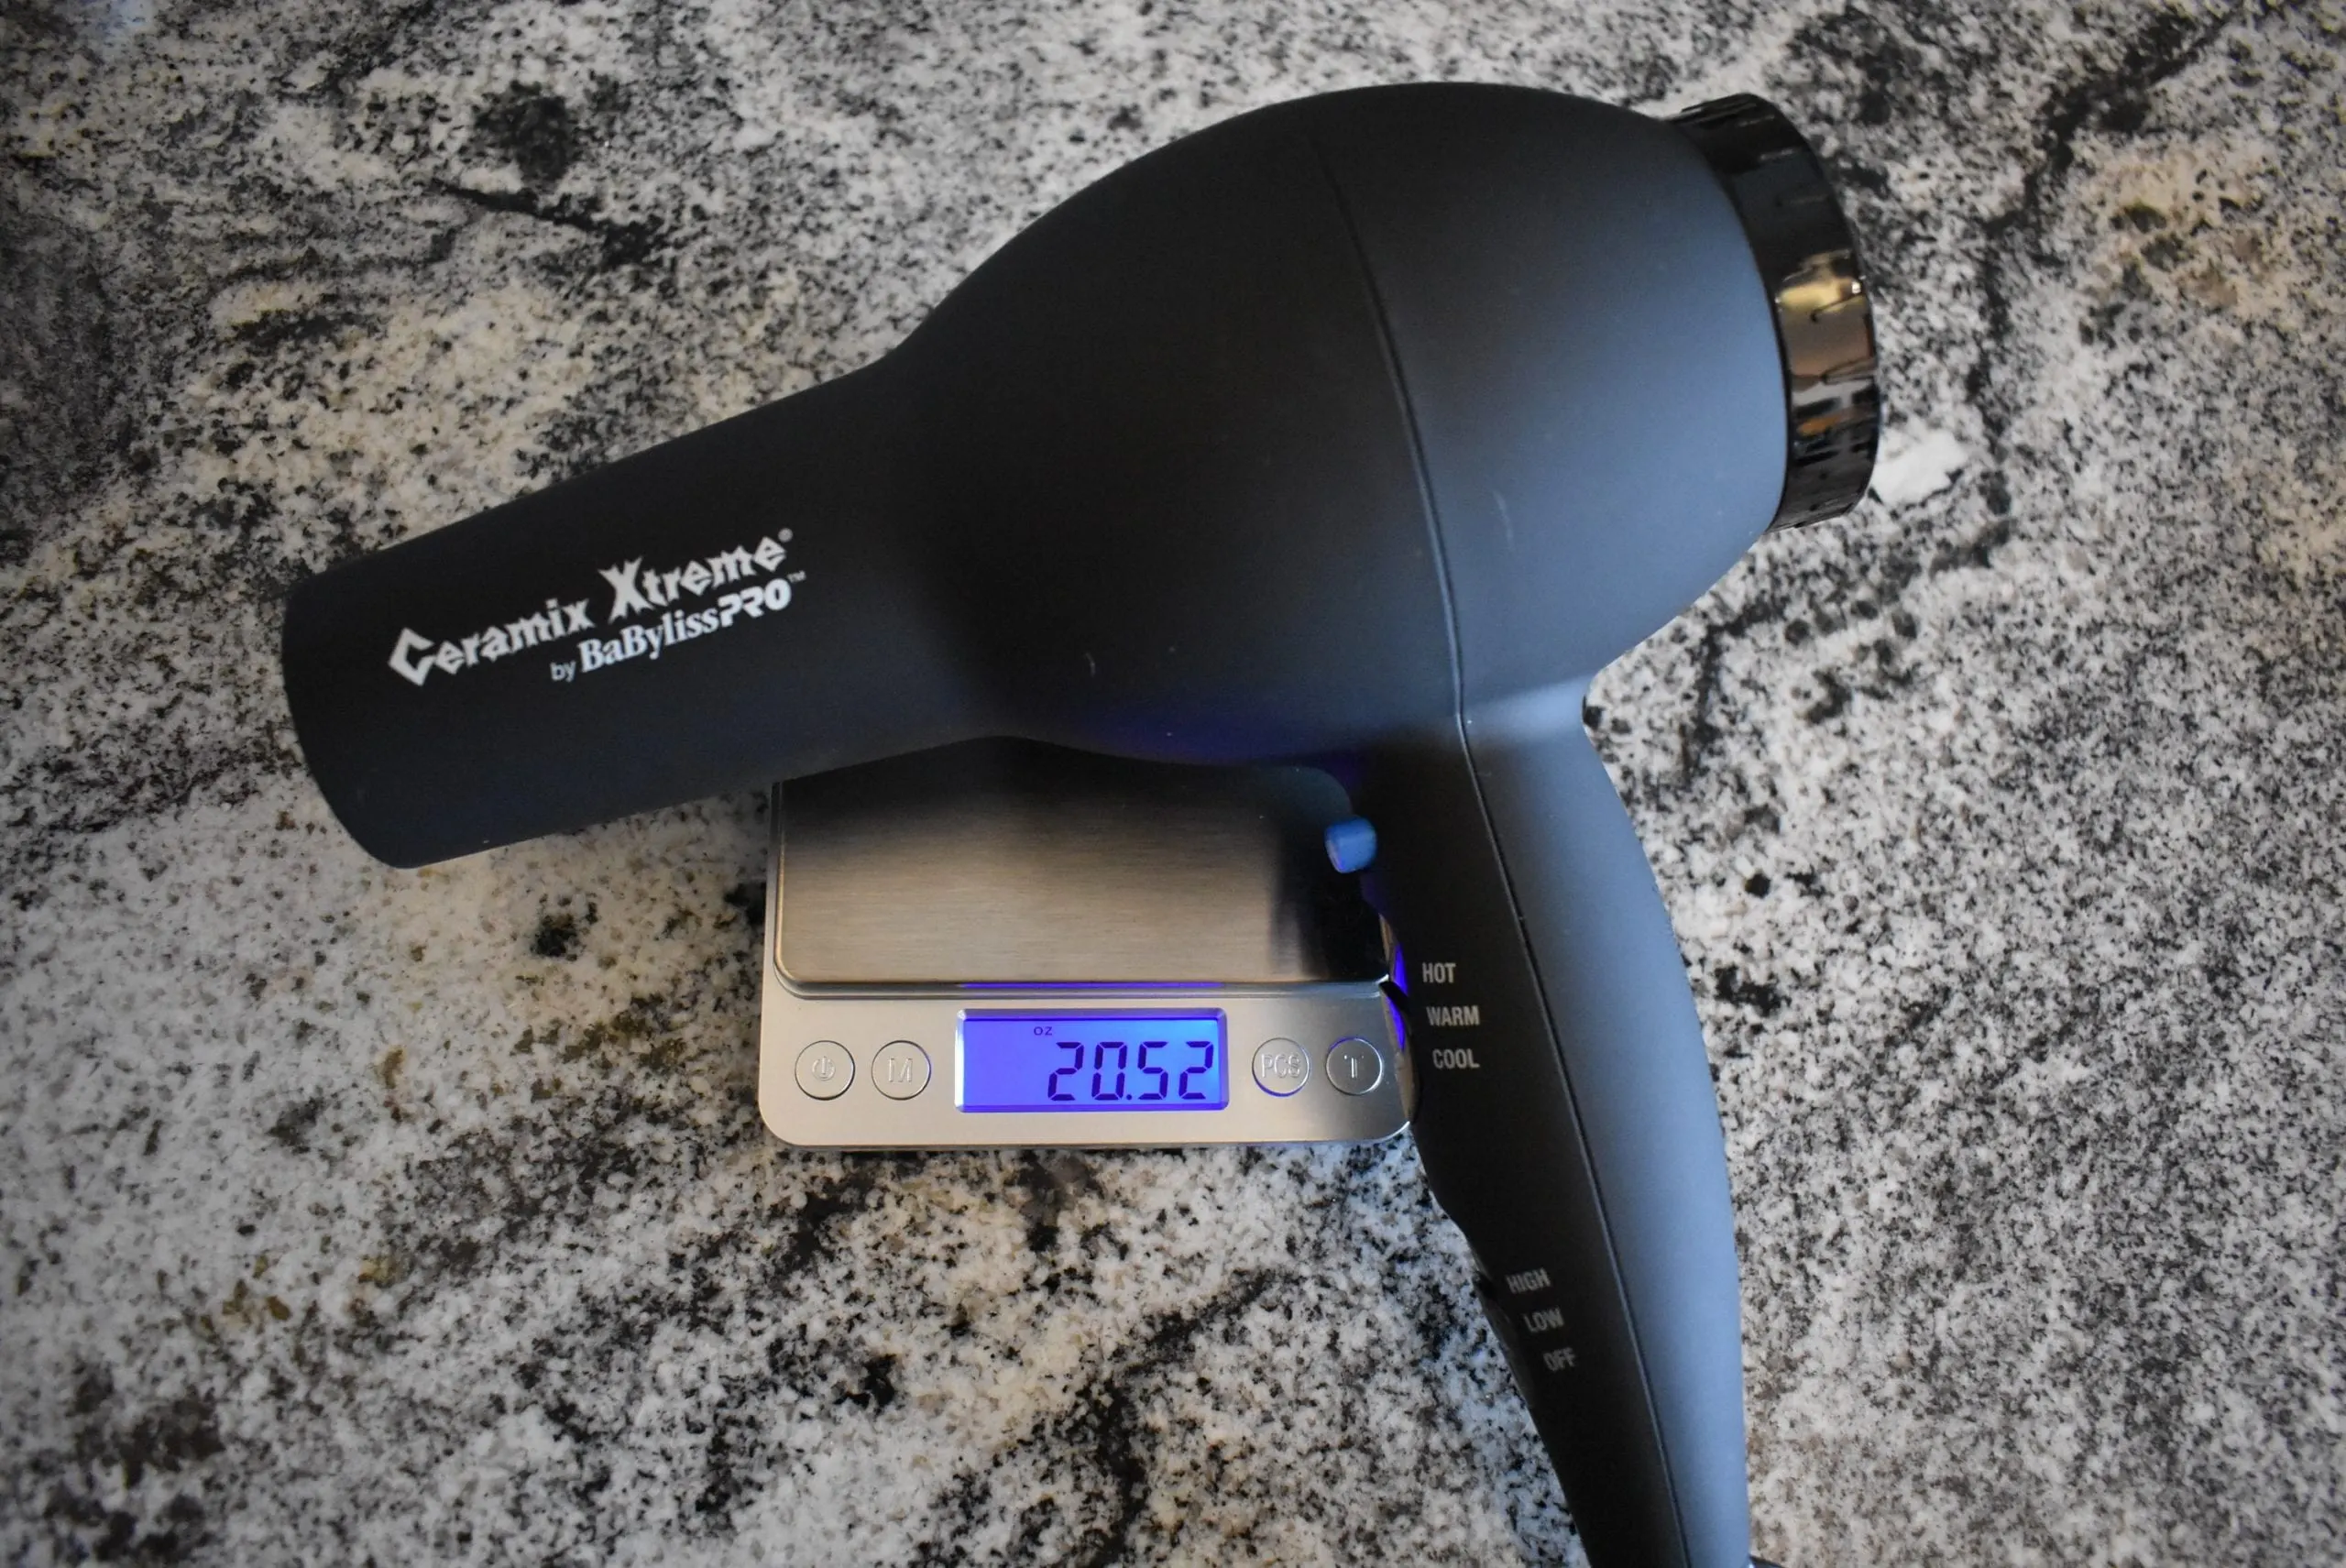 The BaByliss Ceramix Xtreme hair dryer is 1.7 lbs, the heaviest on our best hair dryer list